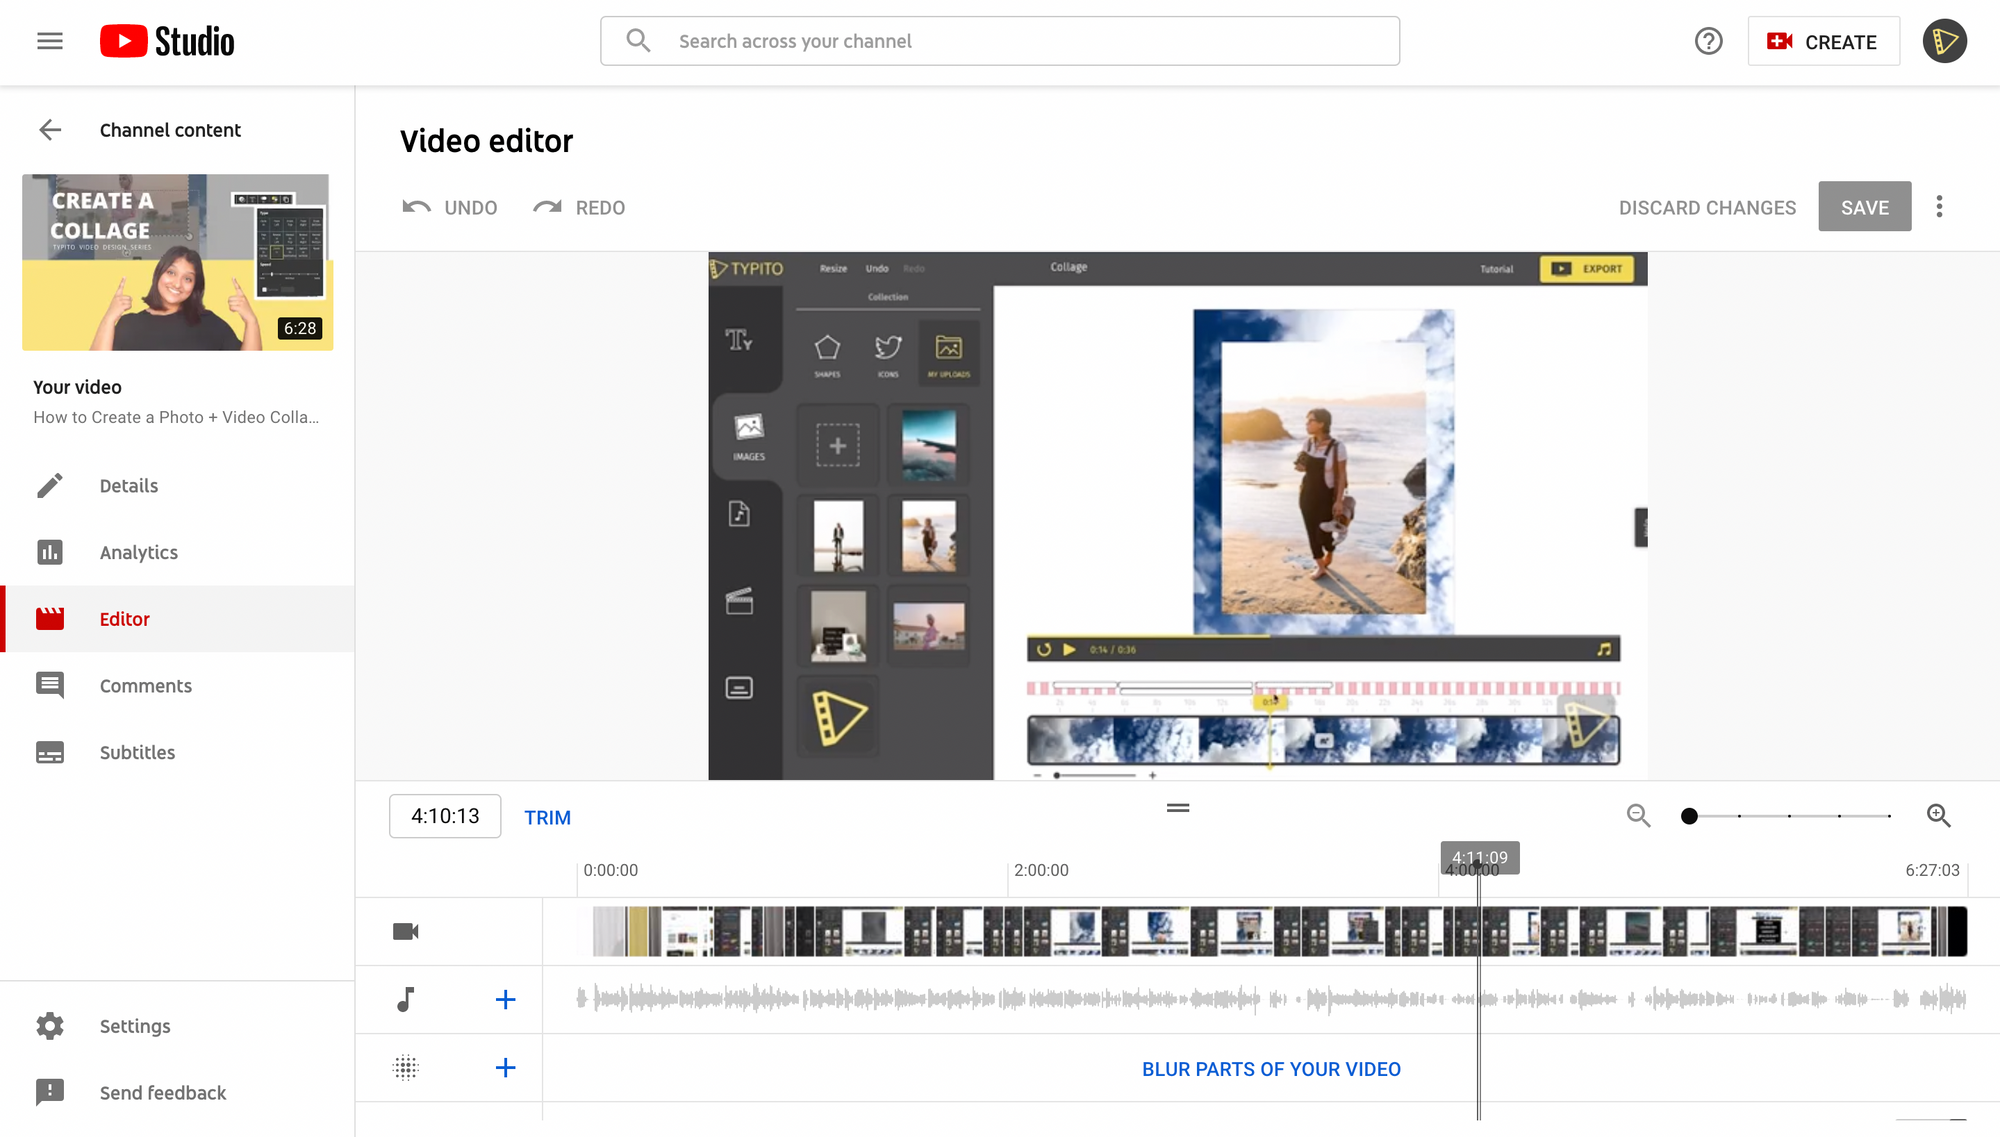 Typito Images - How to Edit Videos on Youtube Studio